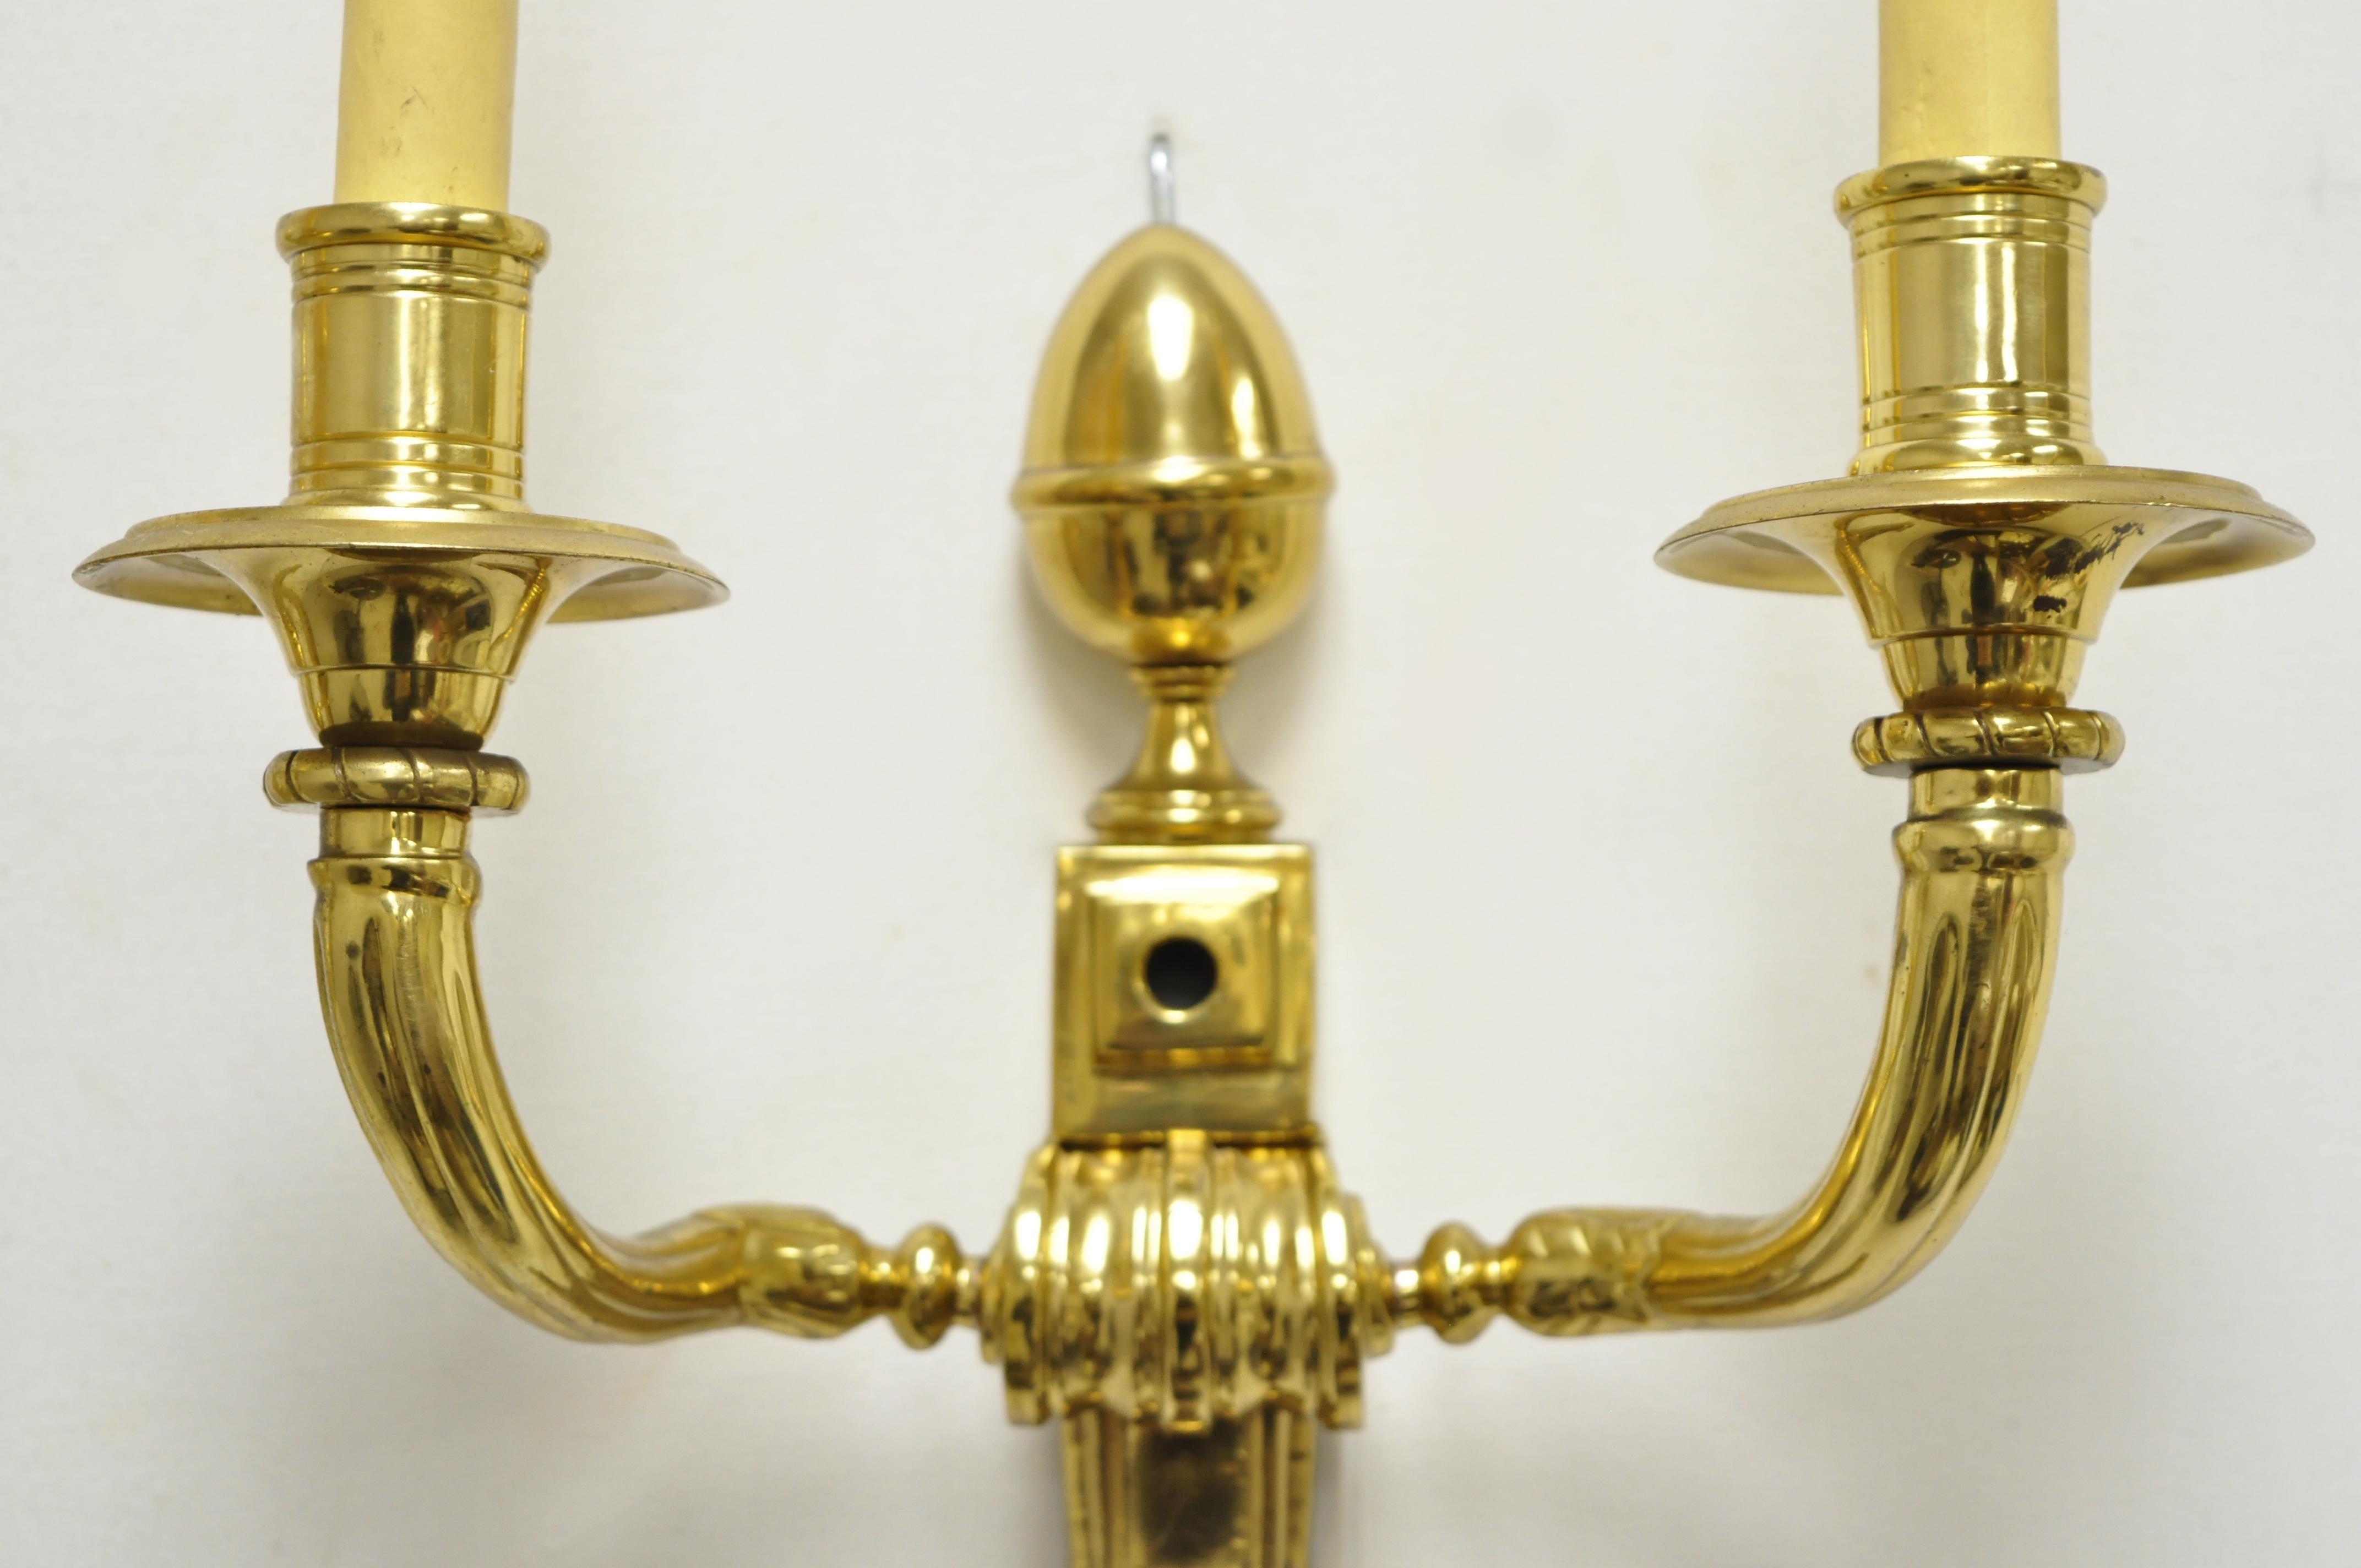 North American Vintage Solid Brass American Colonial Williamsburg Lighted Wall Sconces, Pair A